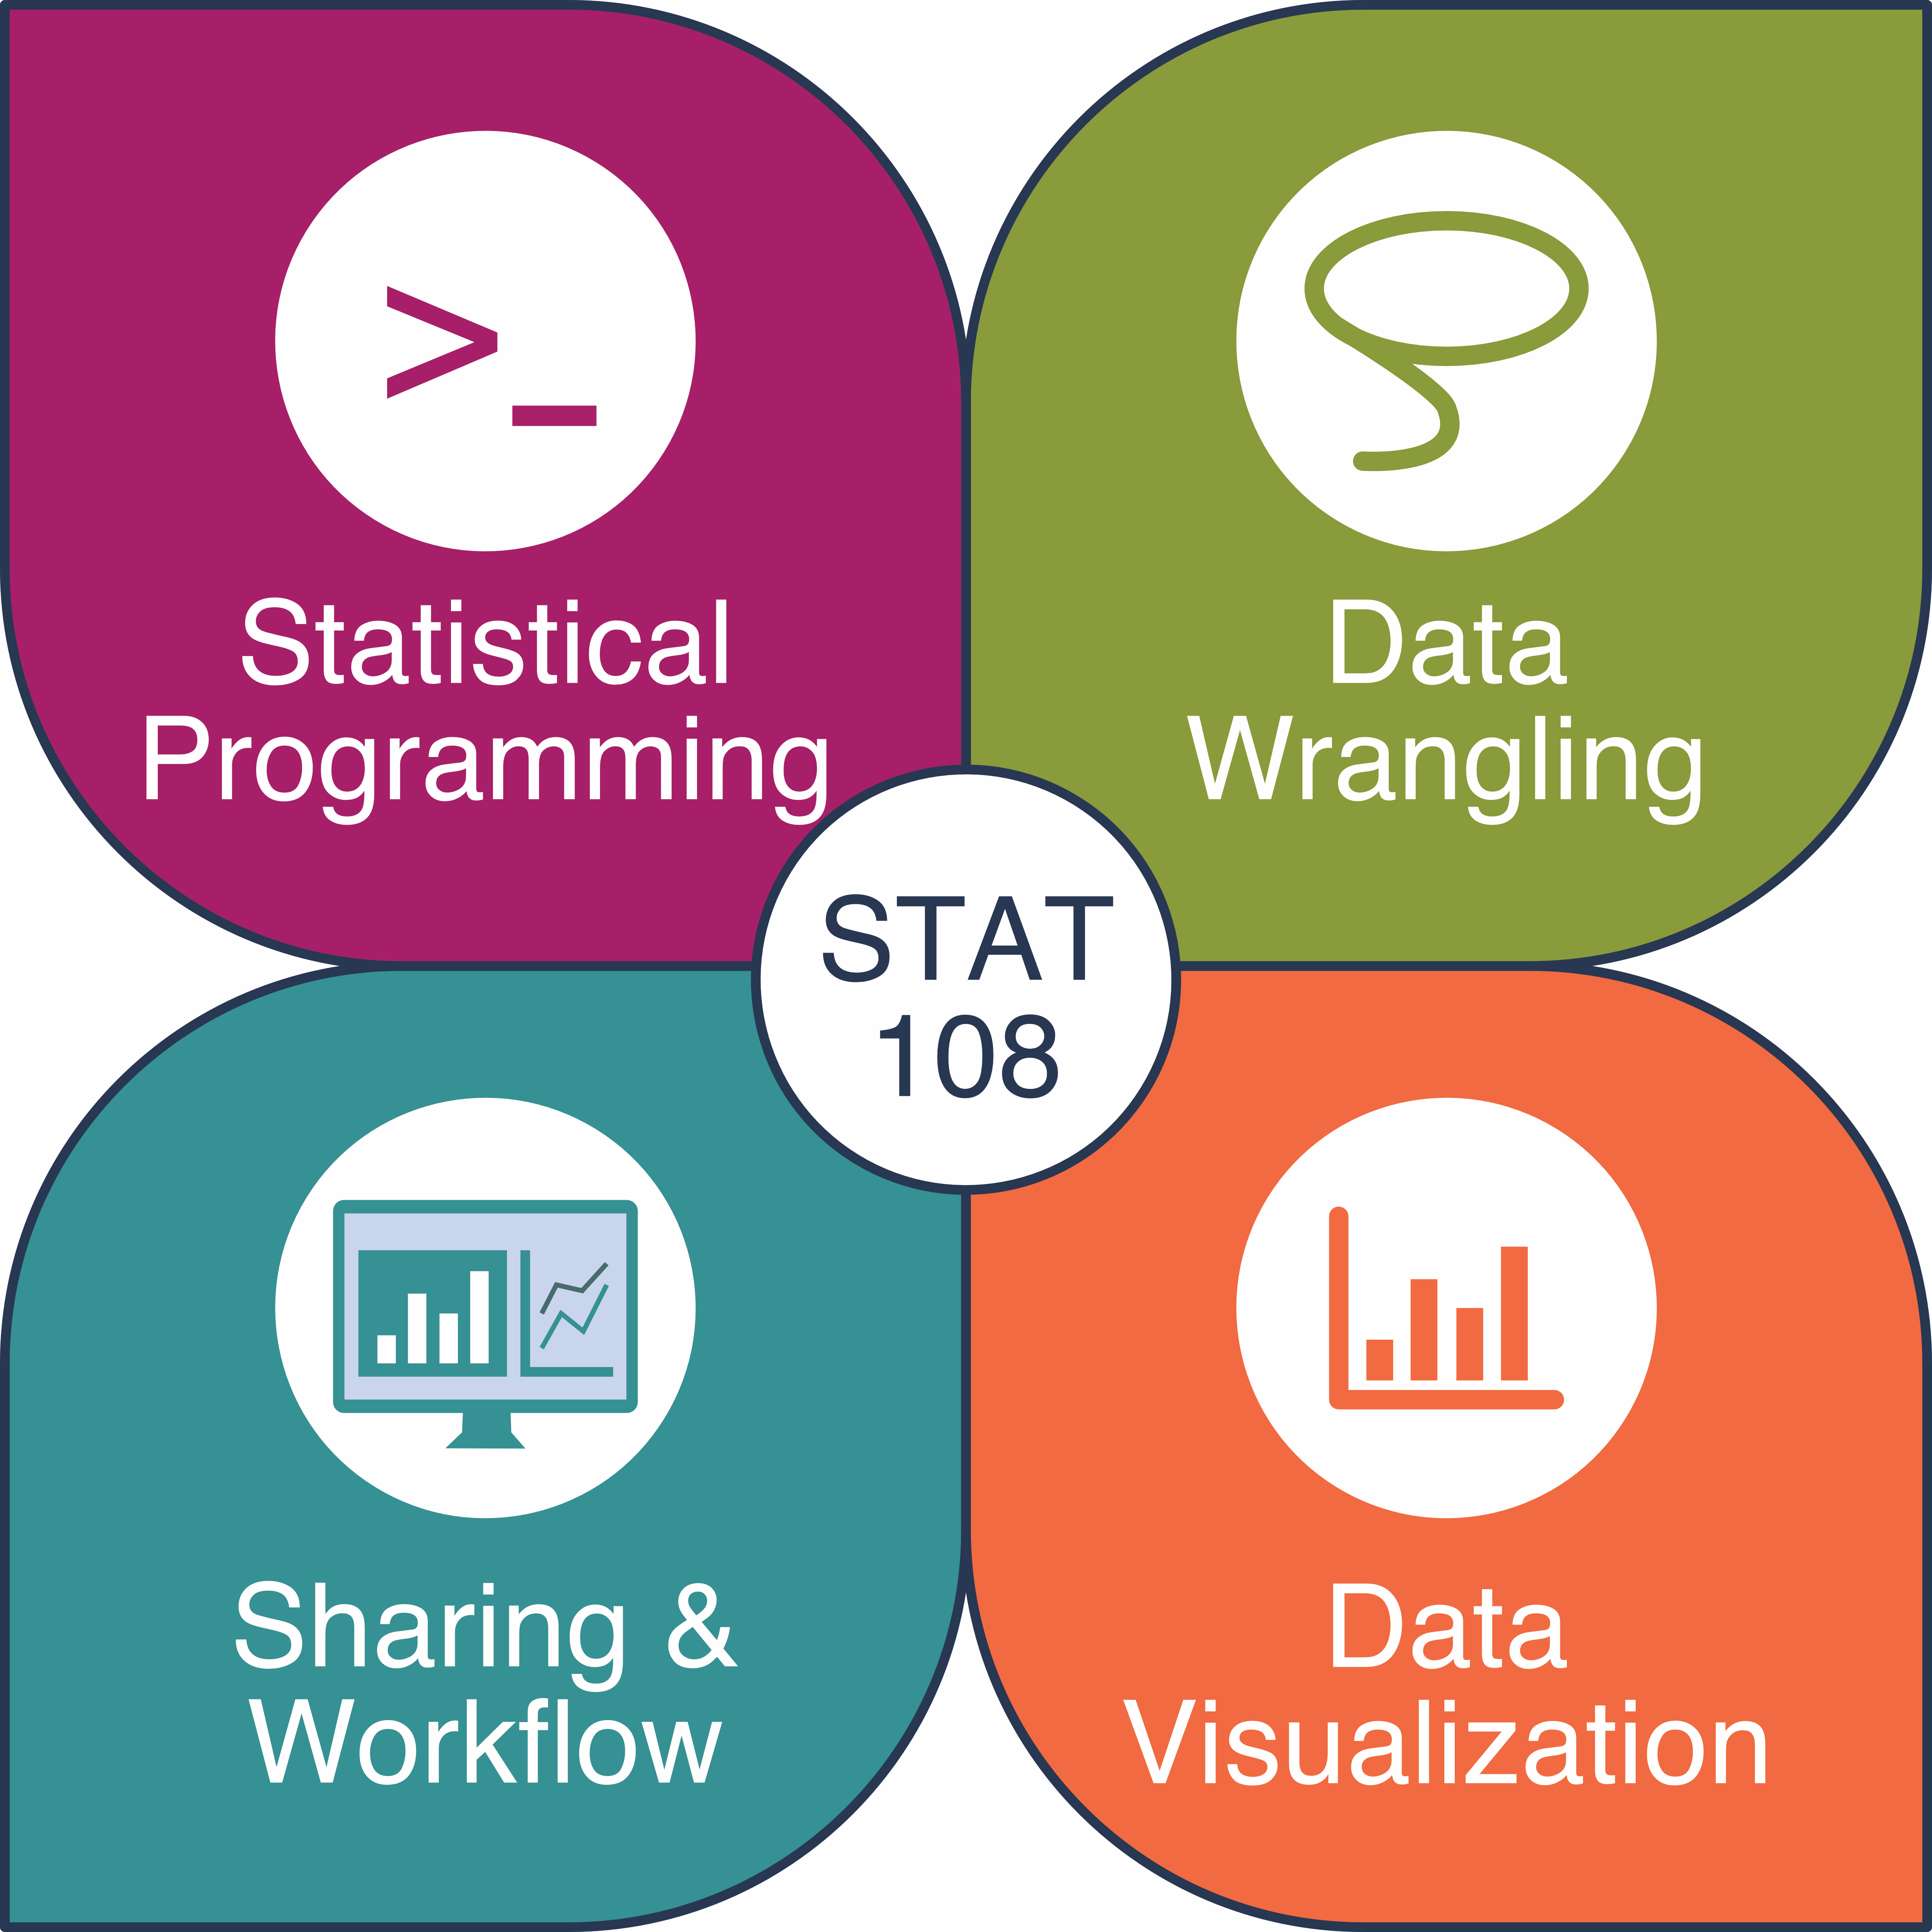 Four components of stat 108: statistical programming, data wrangling, sharing & workflow, and data visualization.